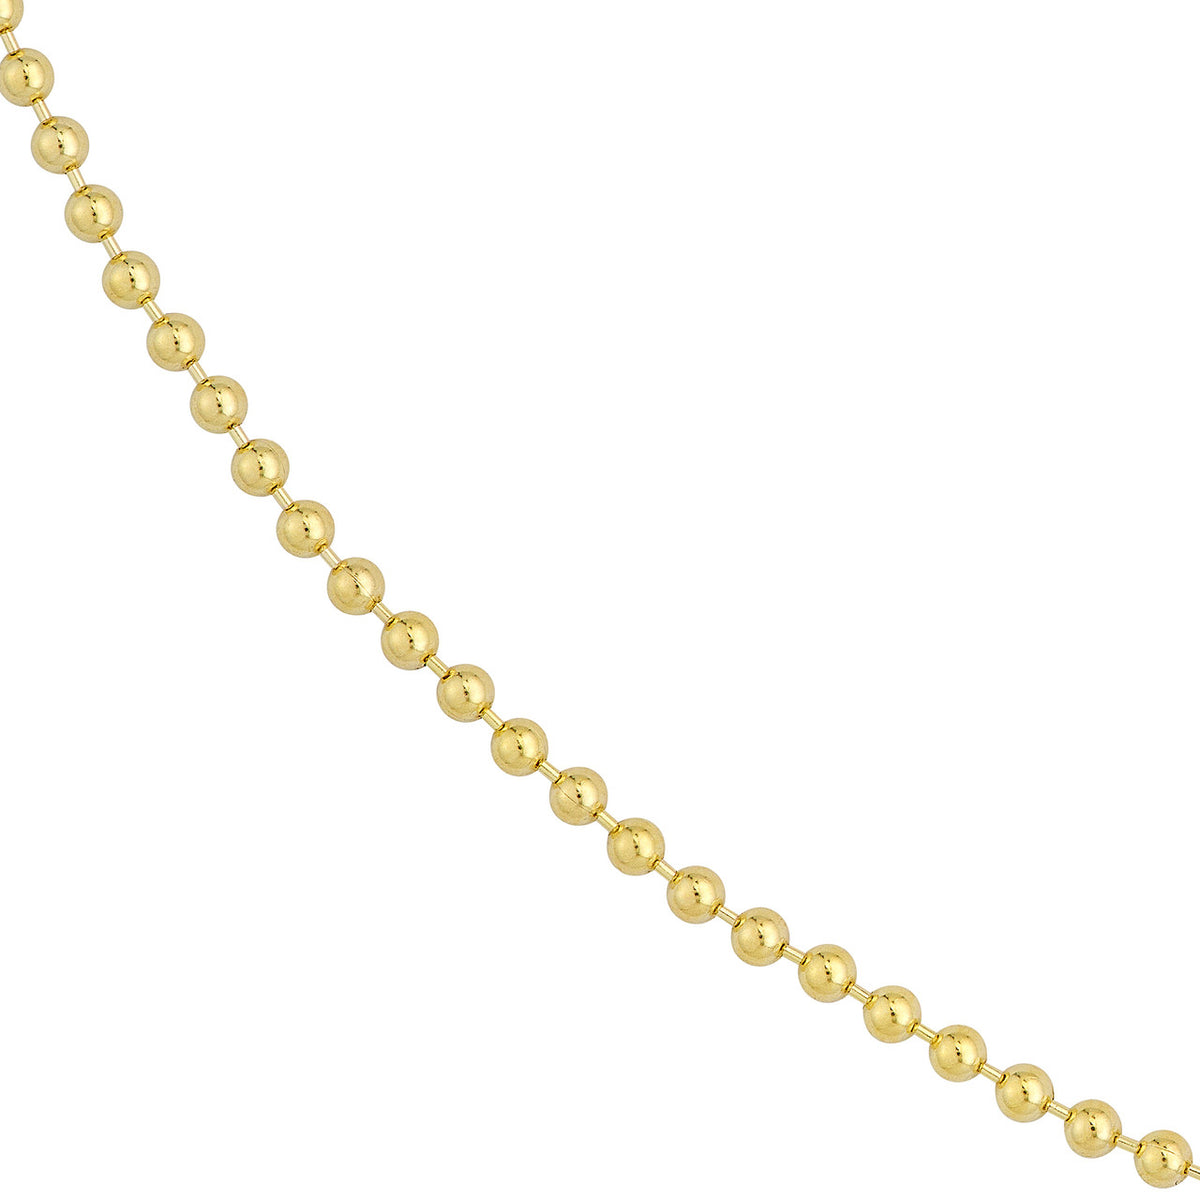 14K Gold 2.5mm Bead Chain Necklace with Lobster Lock